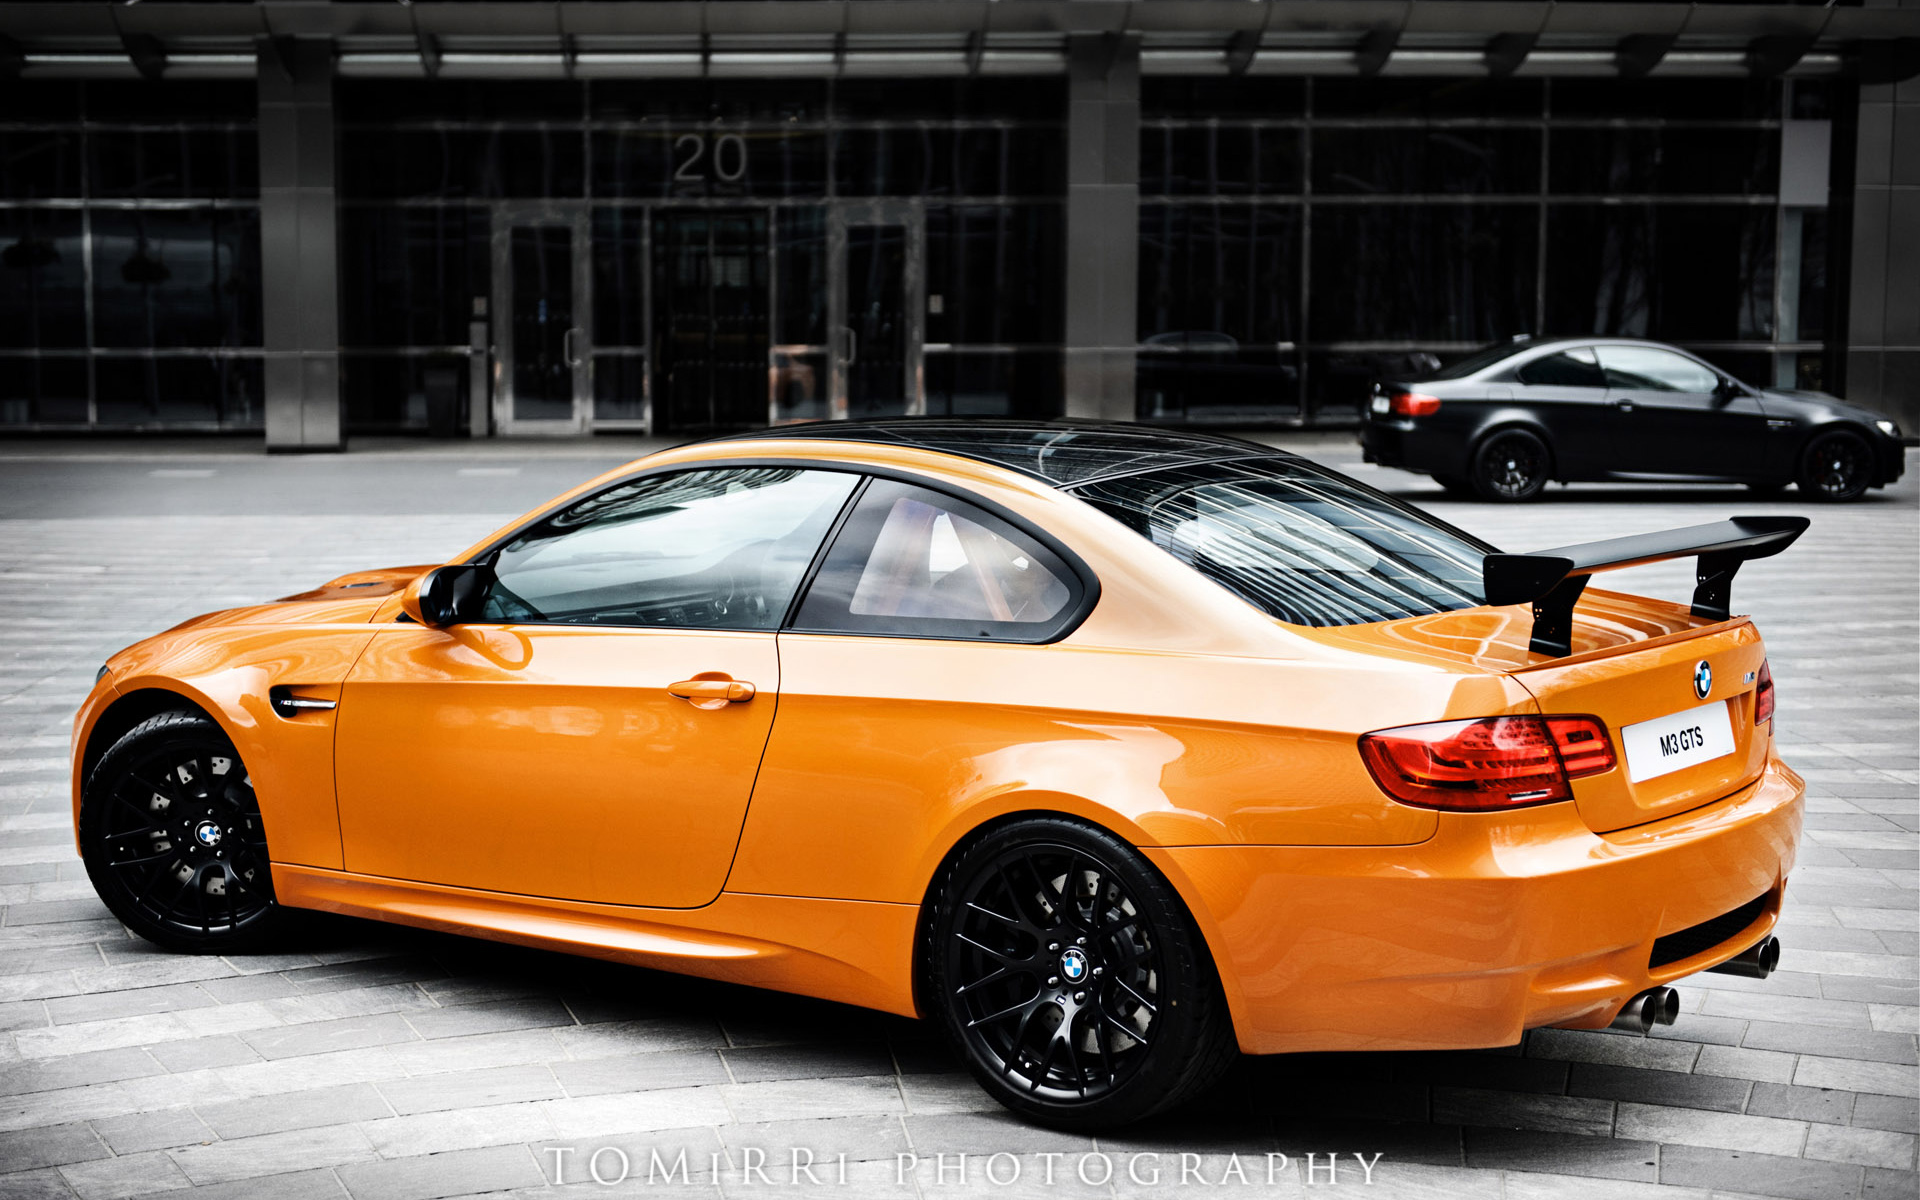 M3 Bmw Wallpaper | Best Review and Pictures 2016